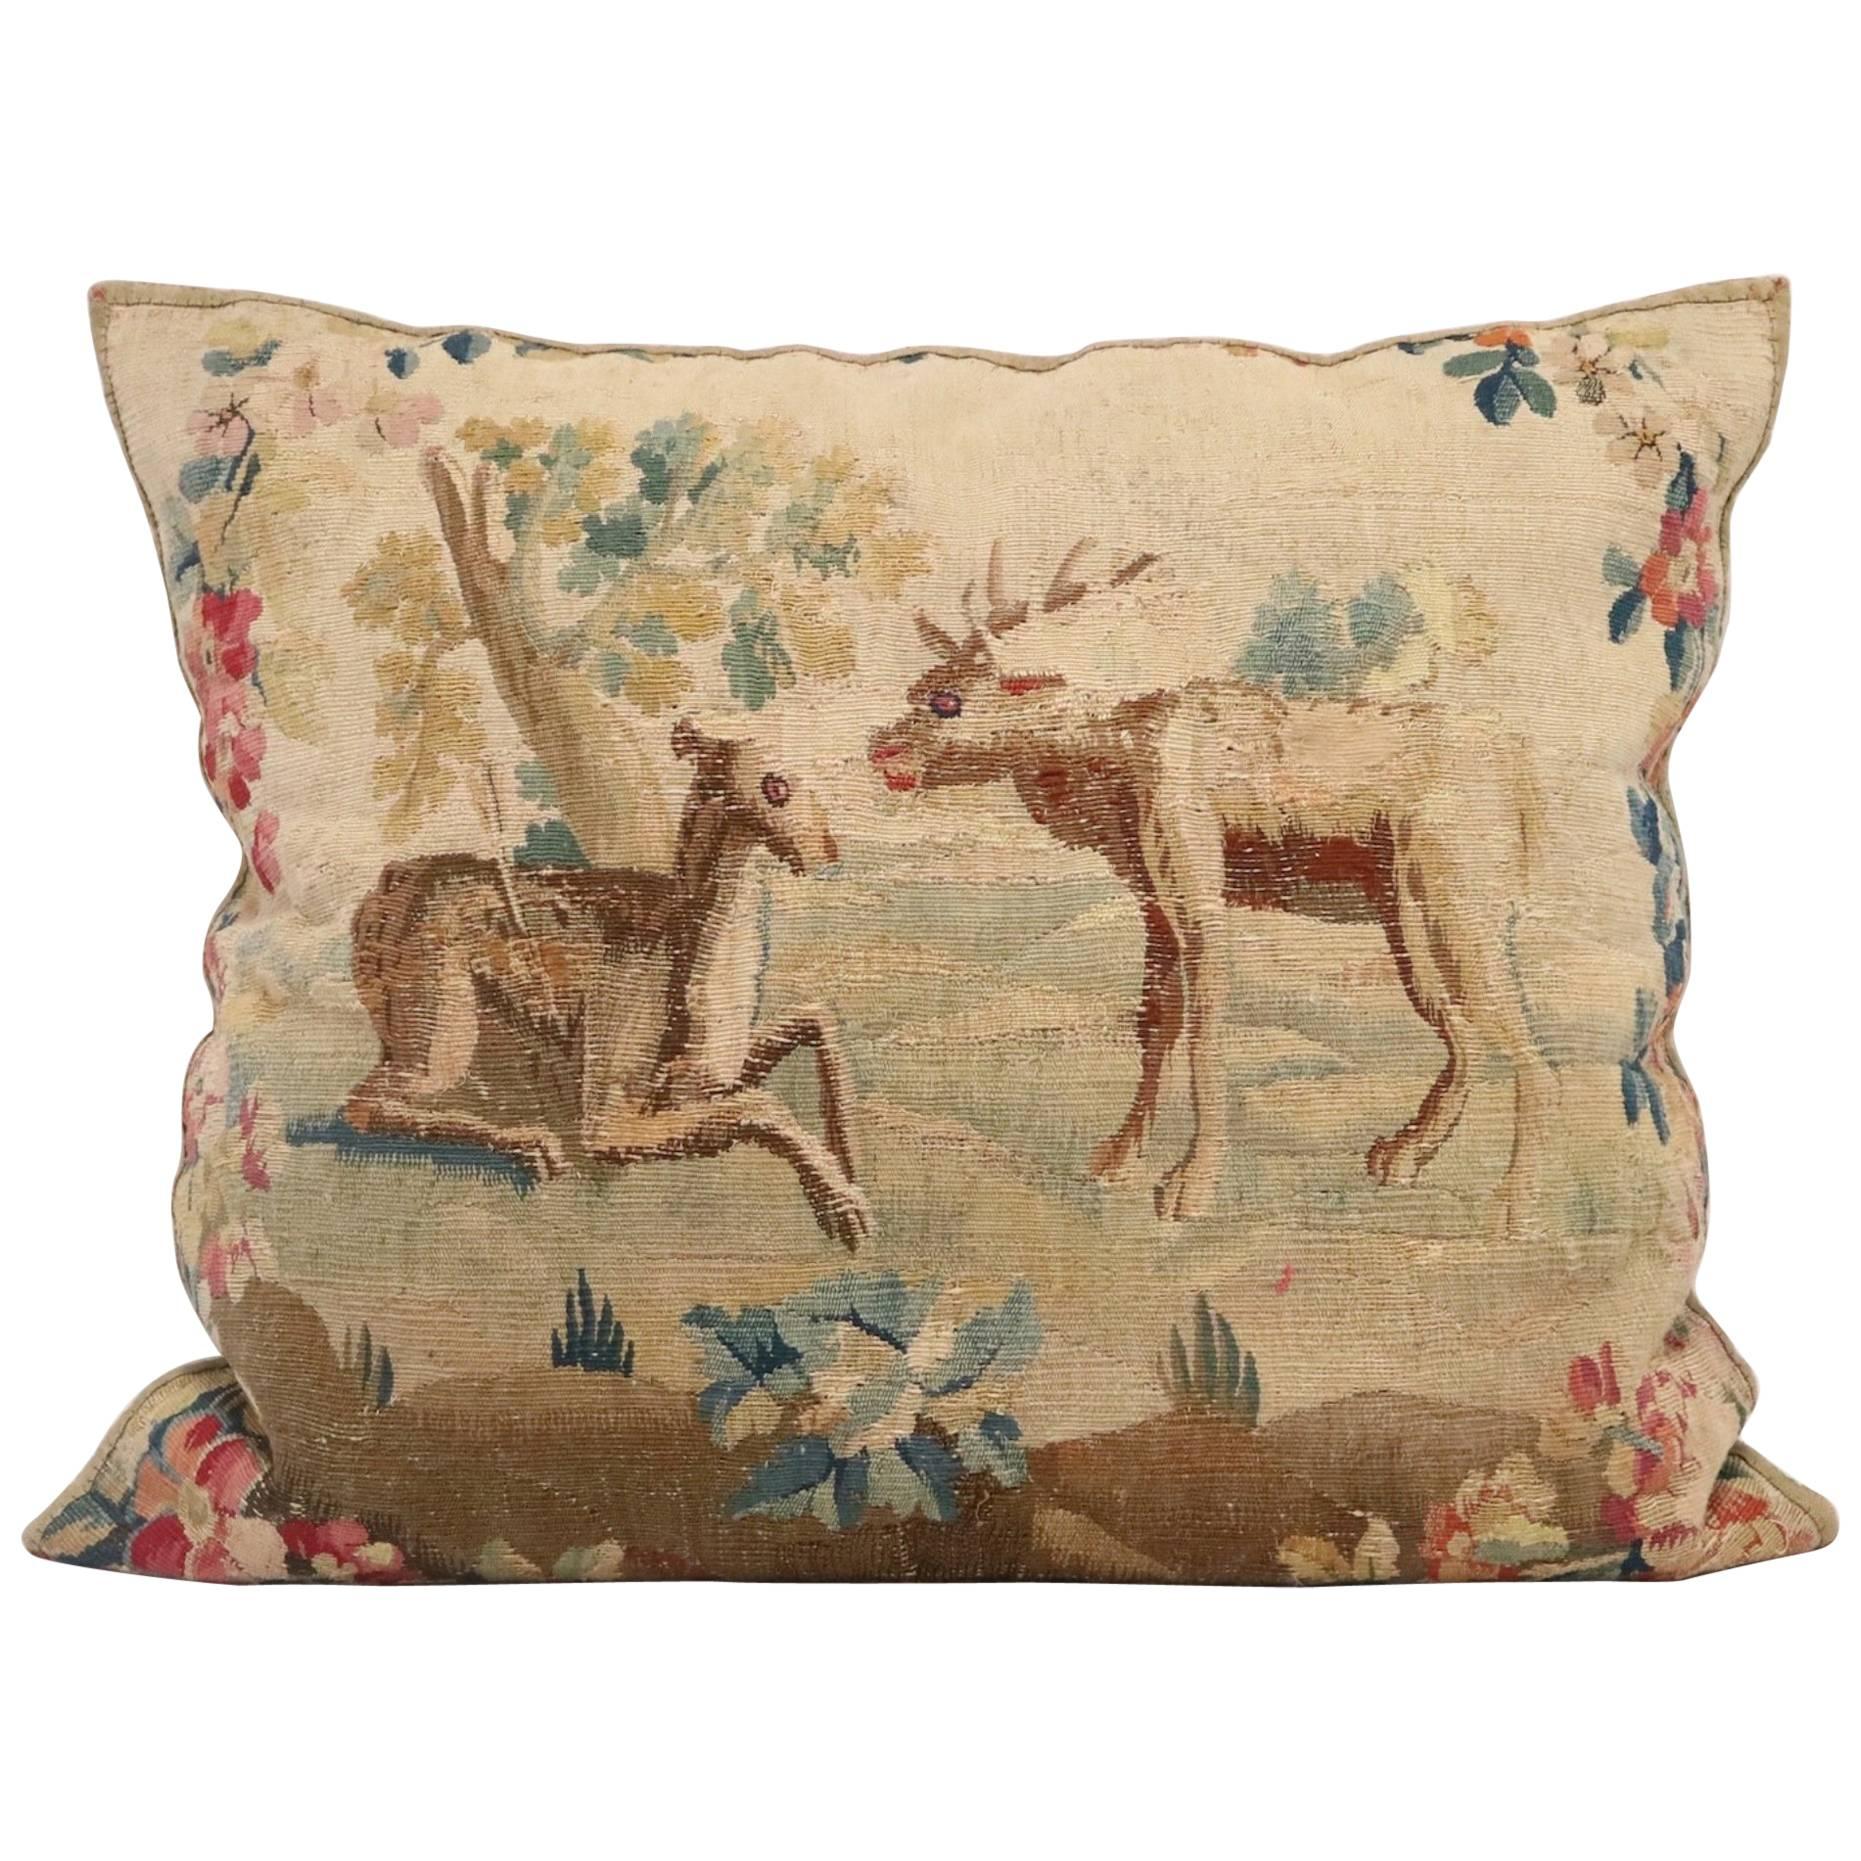 Flemish 17th Century Tapestry Pillow in Cotton and Silk